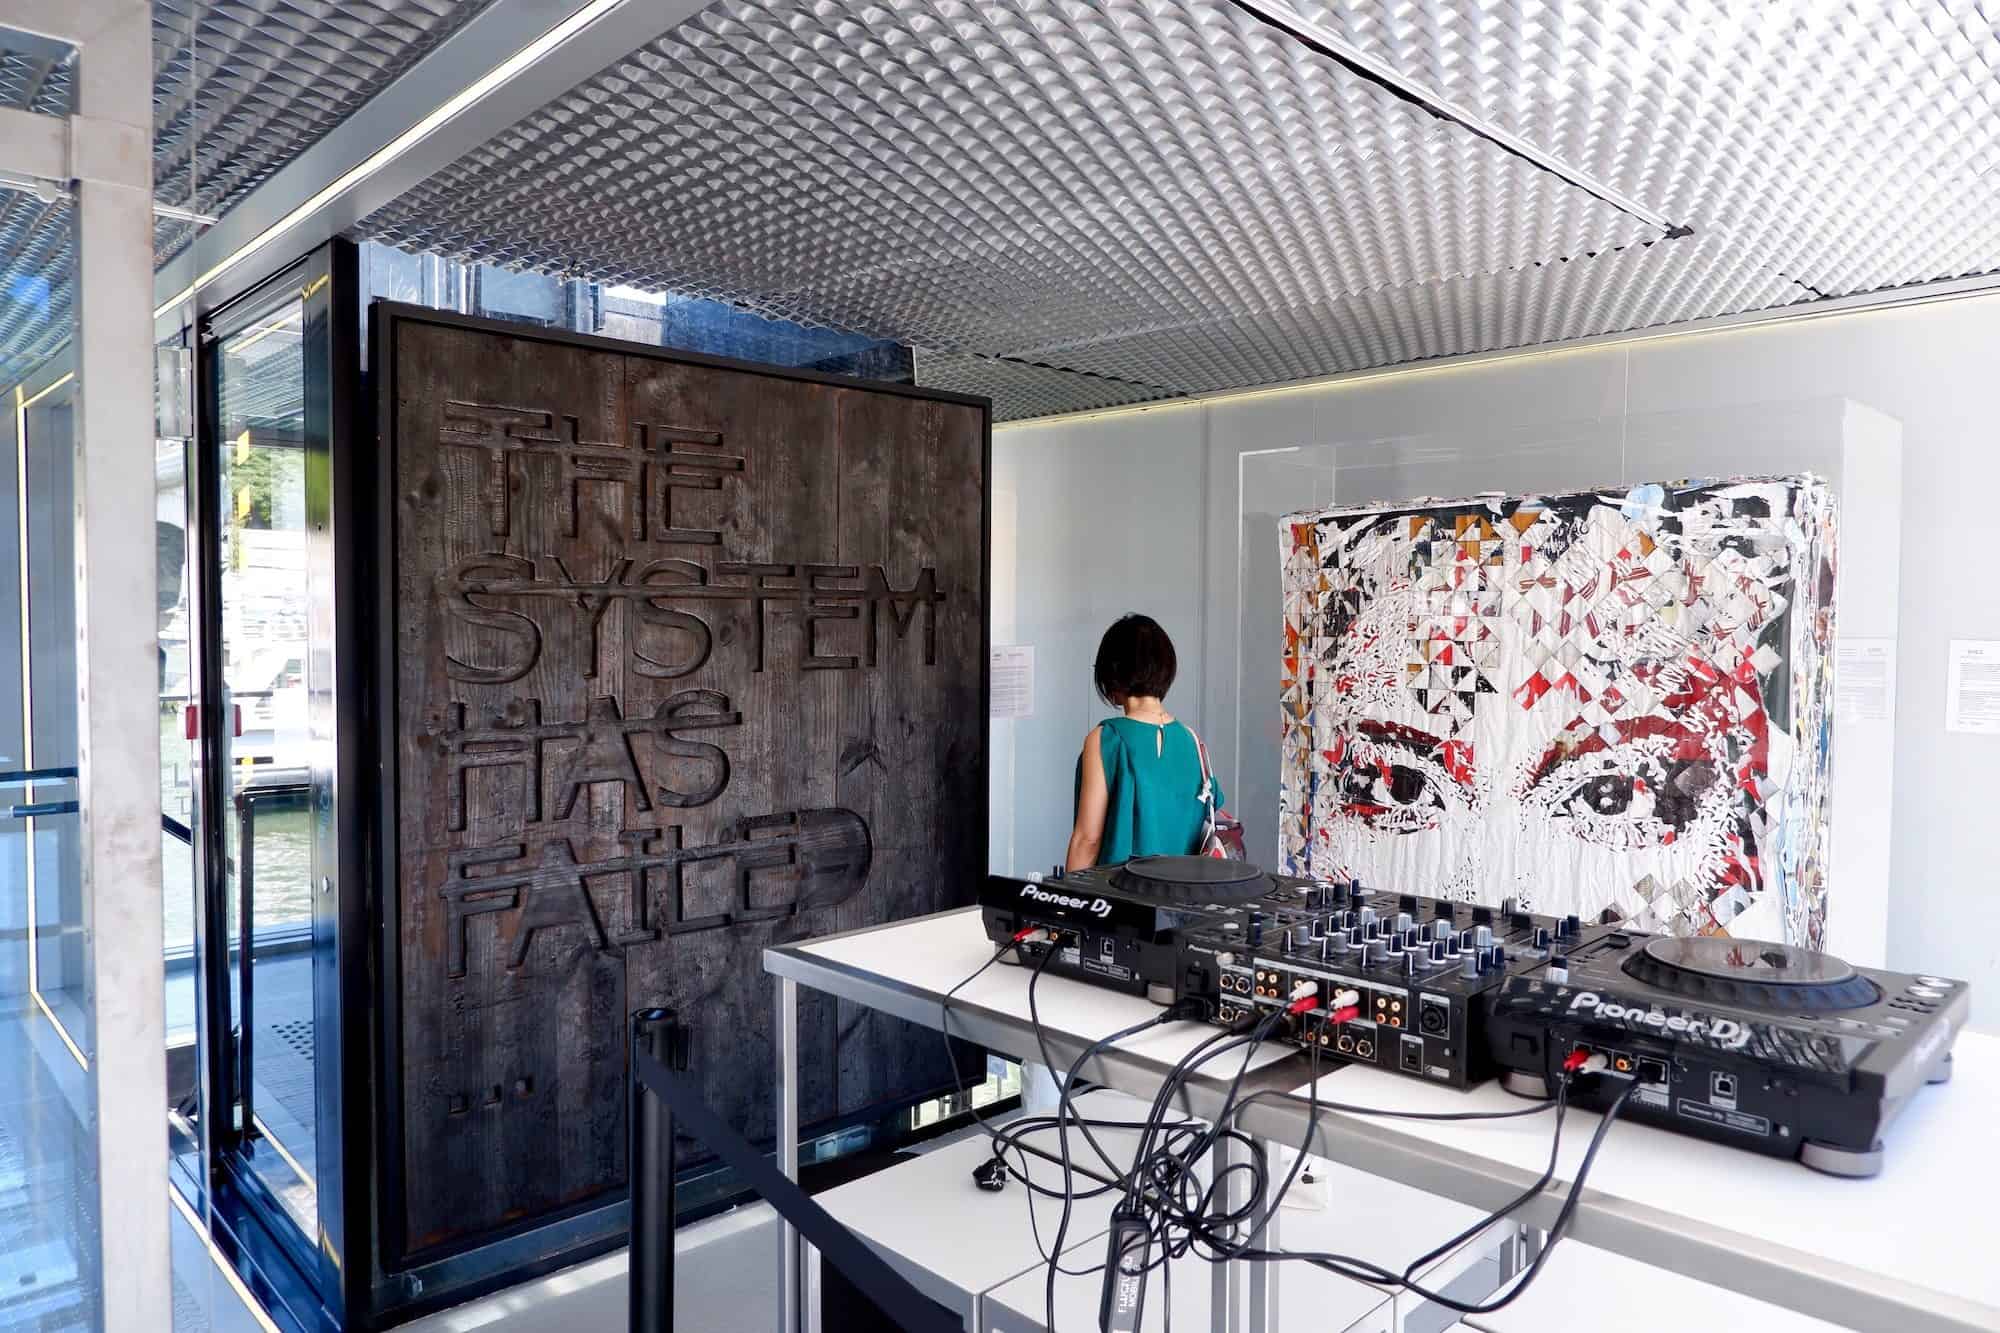 Street art works by Vhils and Rero at the new art center Fluctuart on the River Seine in Paris. 